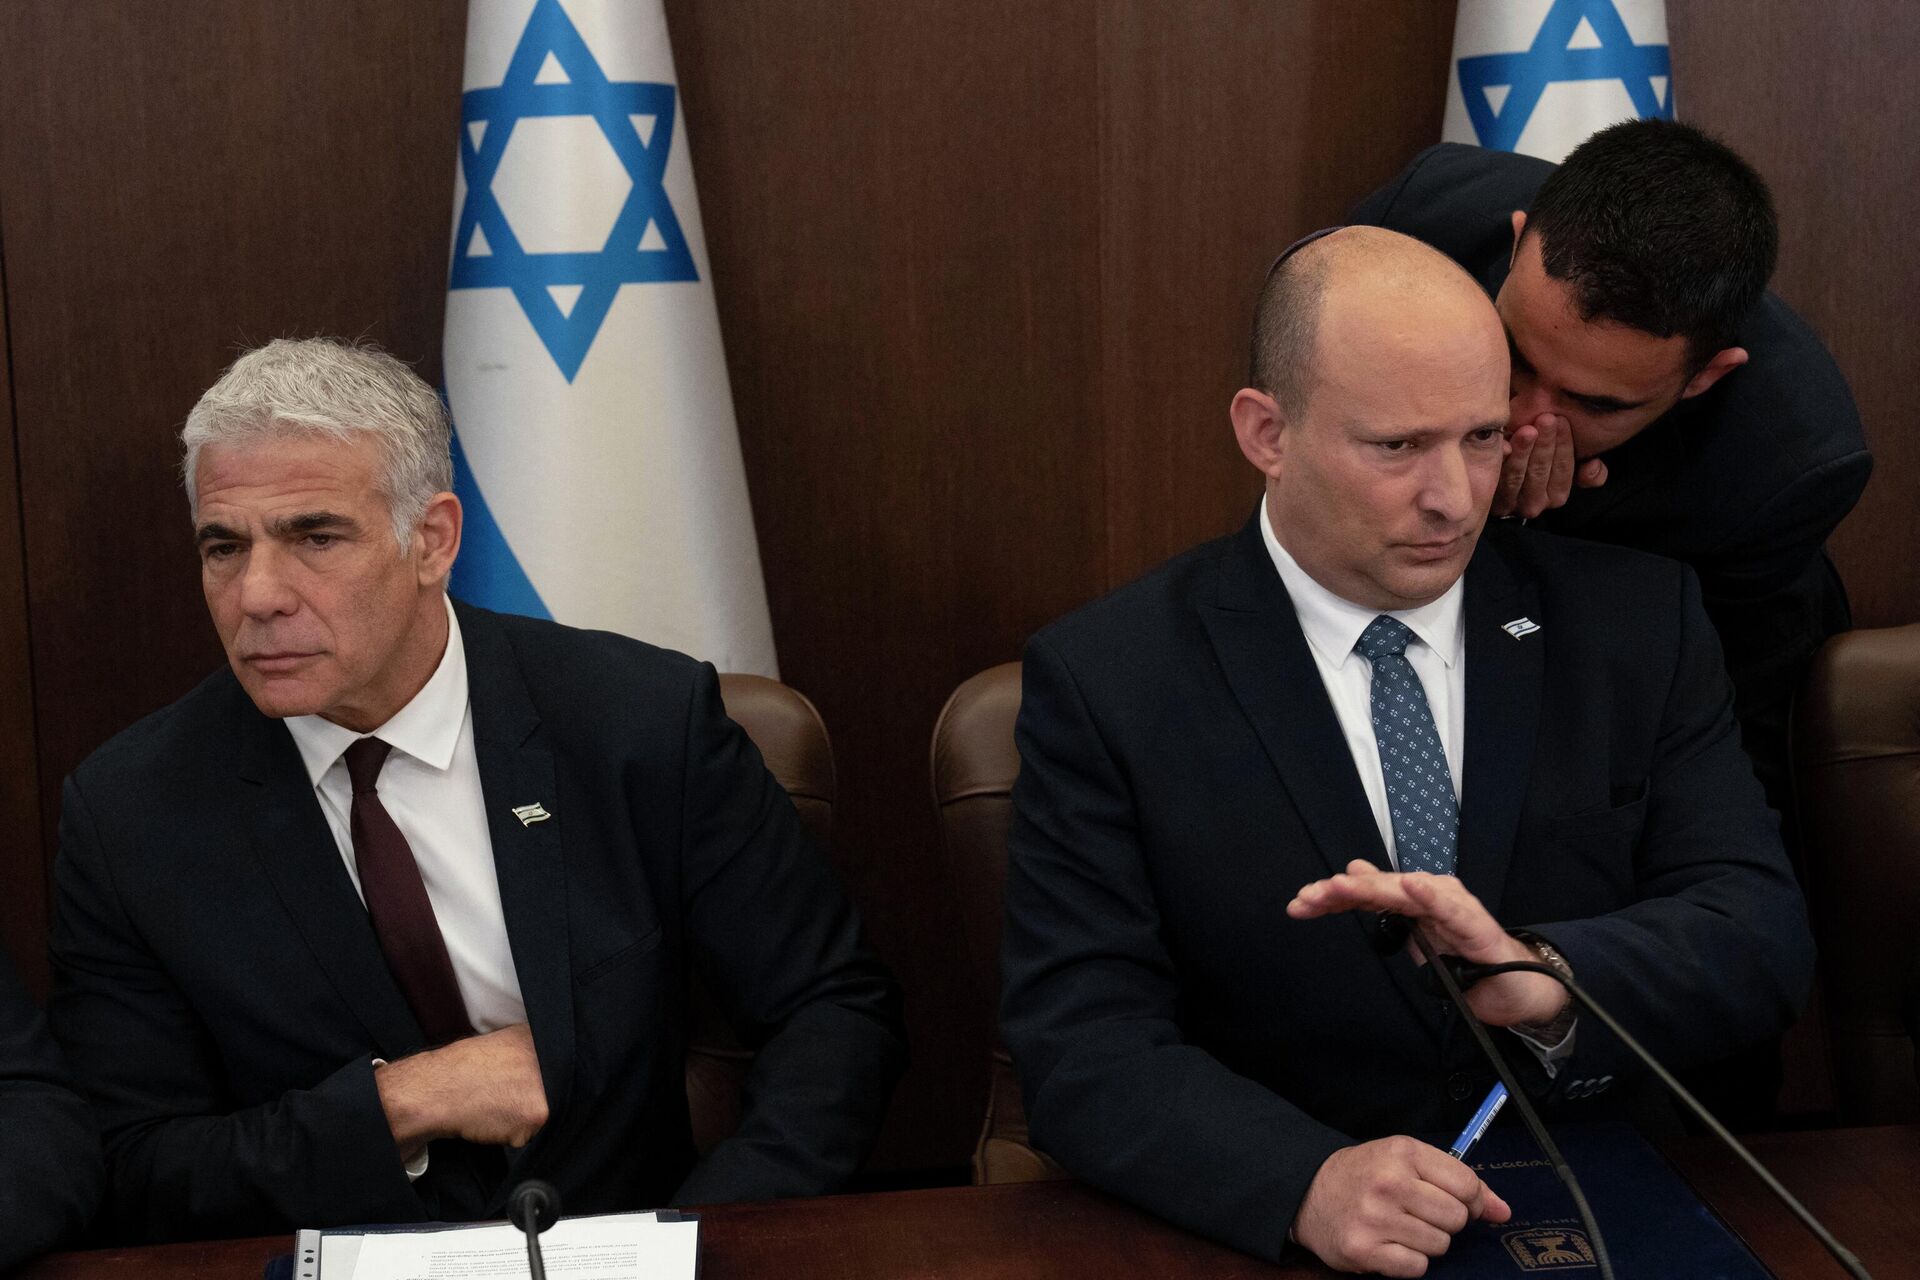 Israeli Prime Minister Naftali Bennett (R) listens to an aide as Foreign Minister Yair Lapid looks on during the weekly cabinet meeting in Jerusalem, on May 8, 2022 - Sputnik International, 1920, 22.06.2022